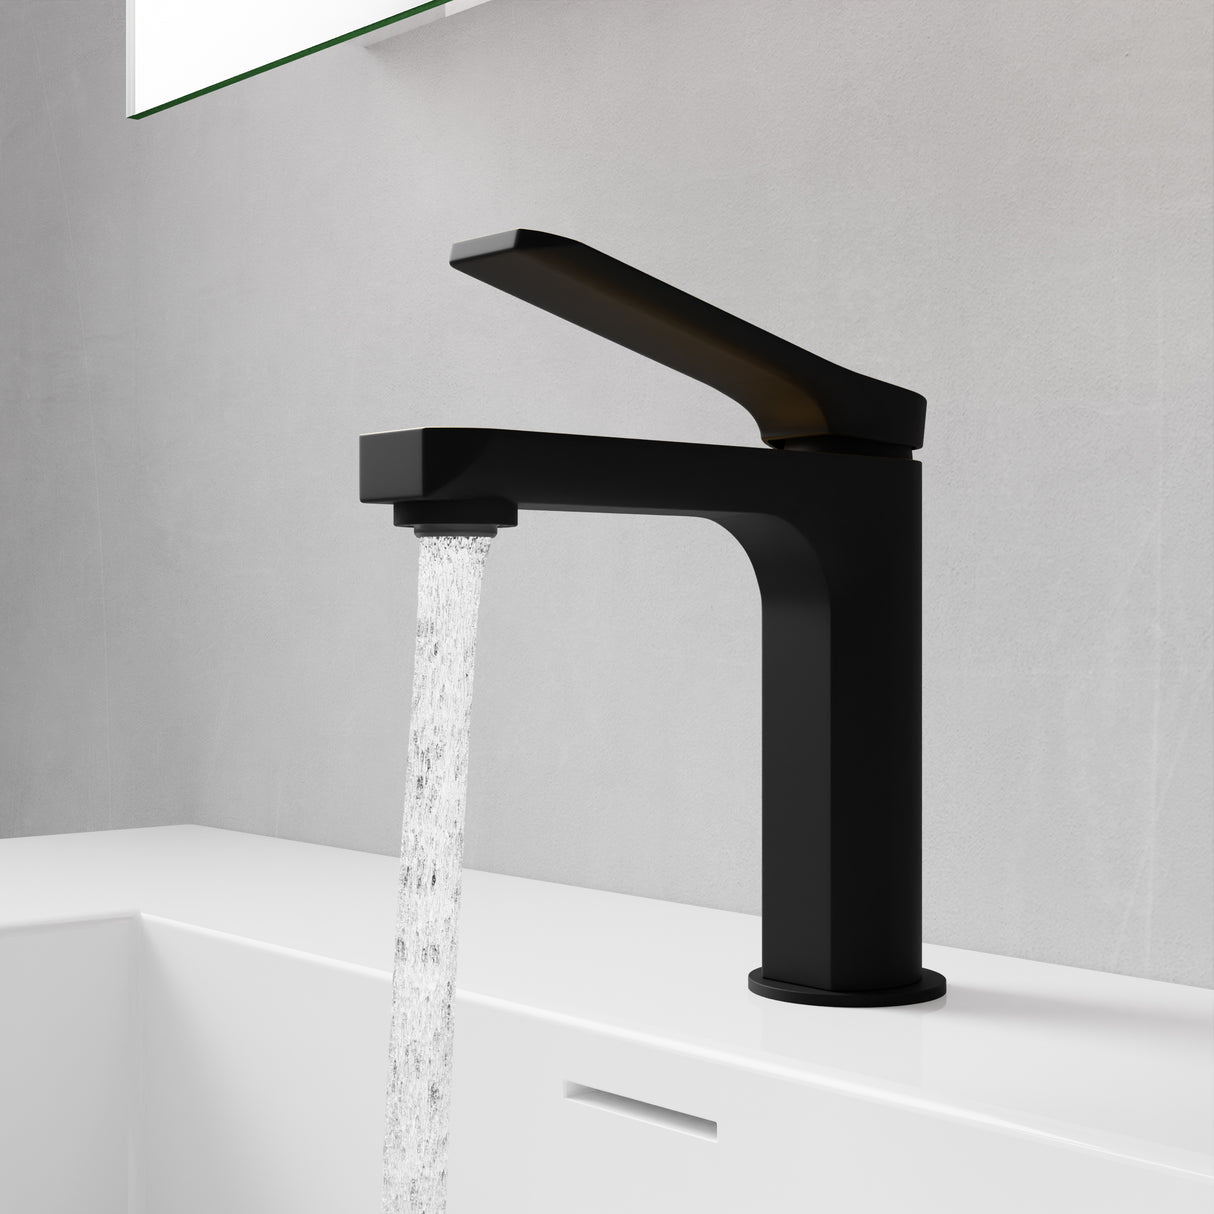 ANZZI L-AZ900MB-BG Single Handle Single Hole Bathroom Faucet With Pop-up Drain in Matte Black & Brushed Gold